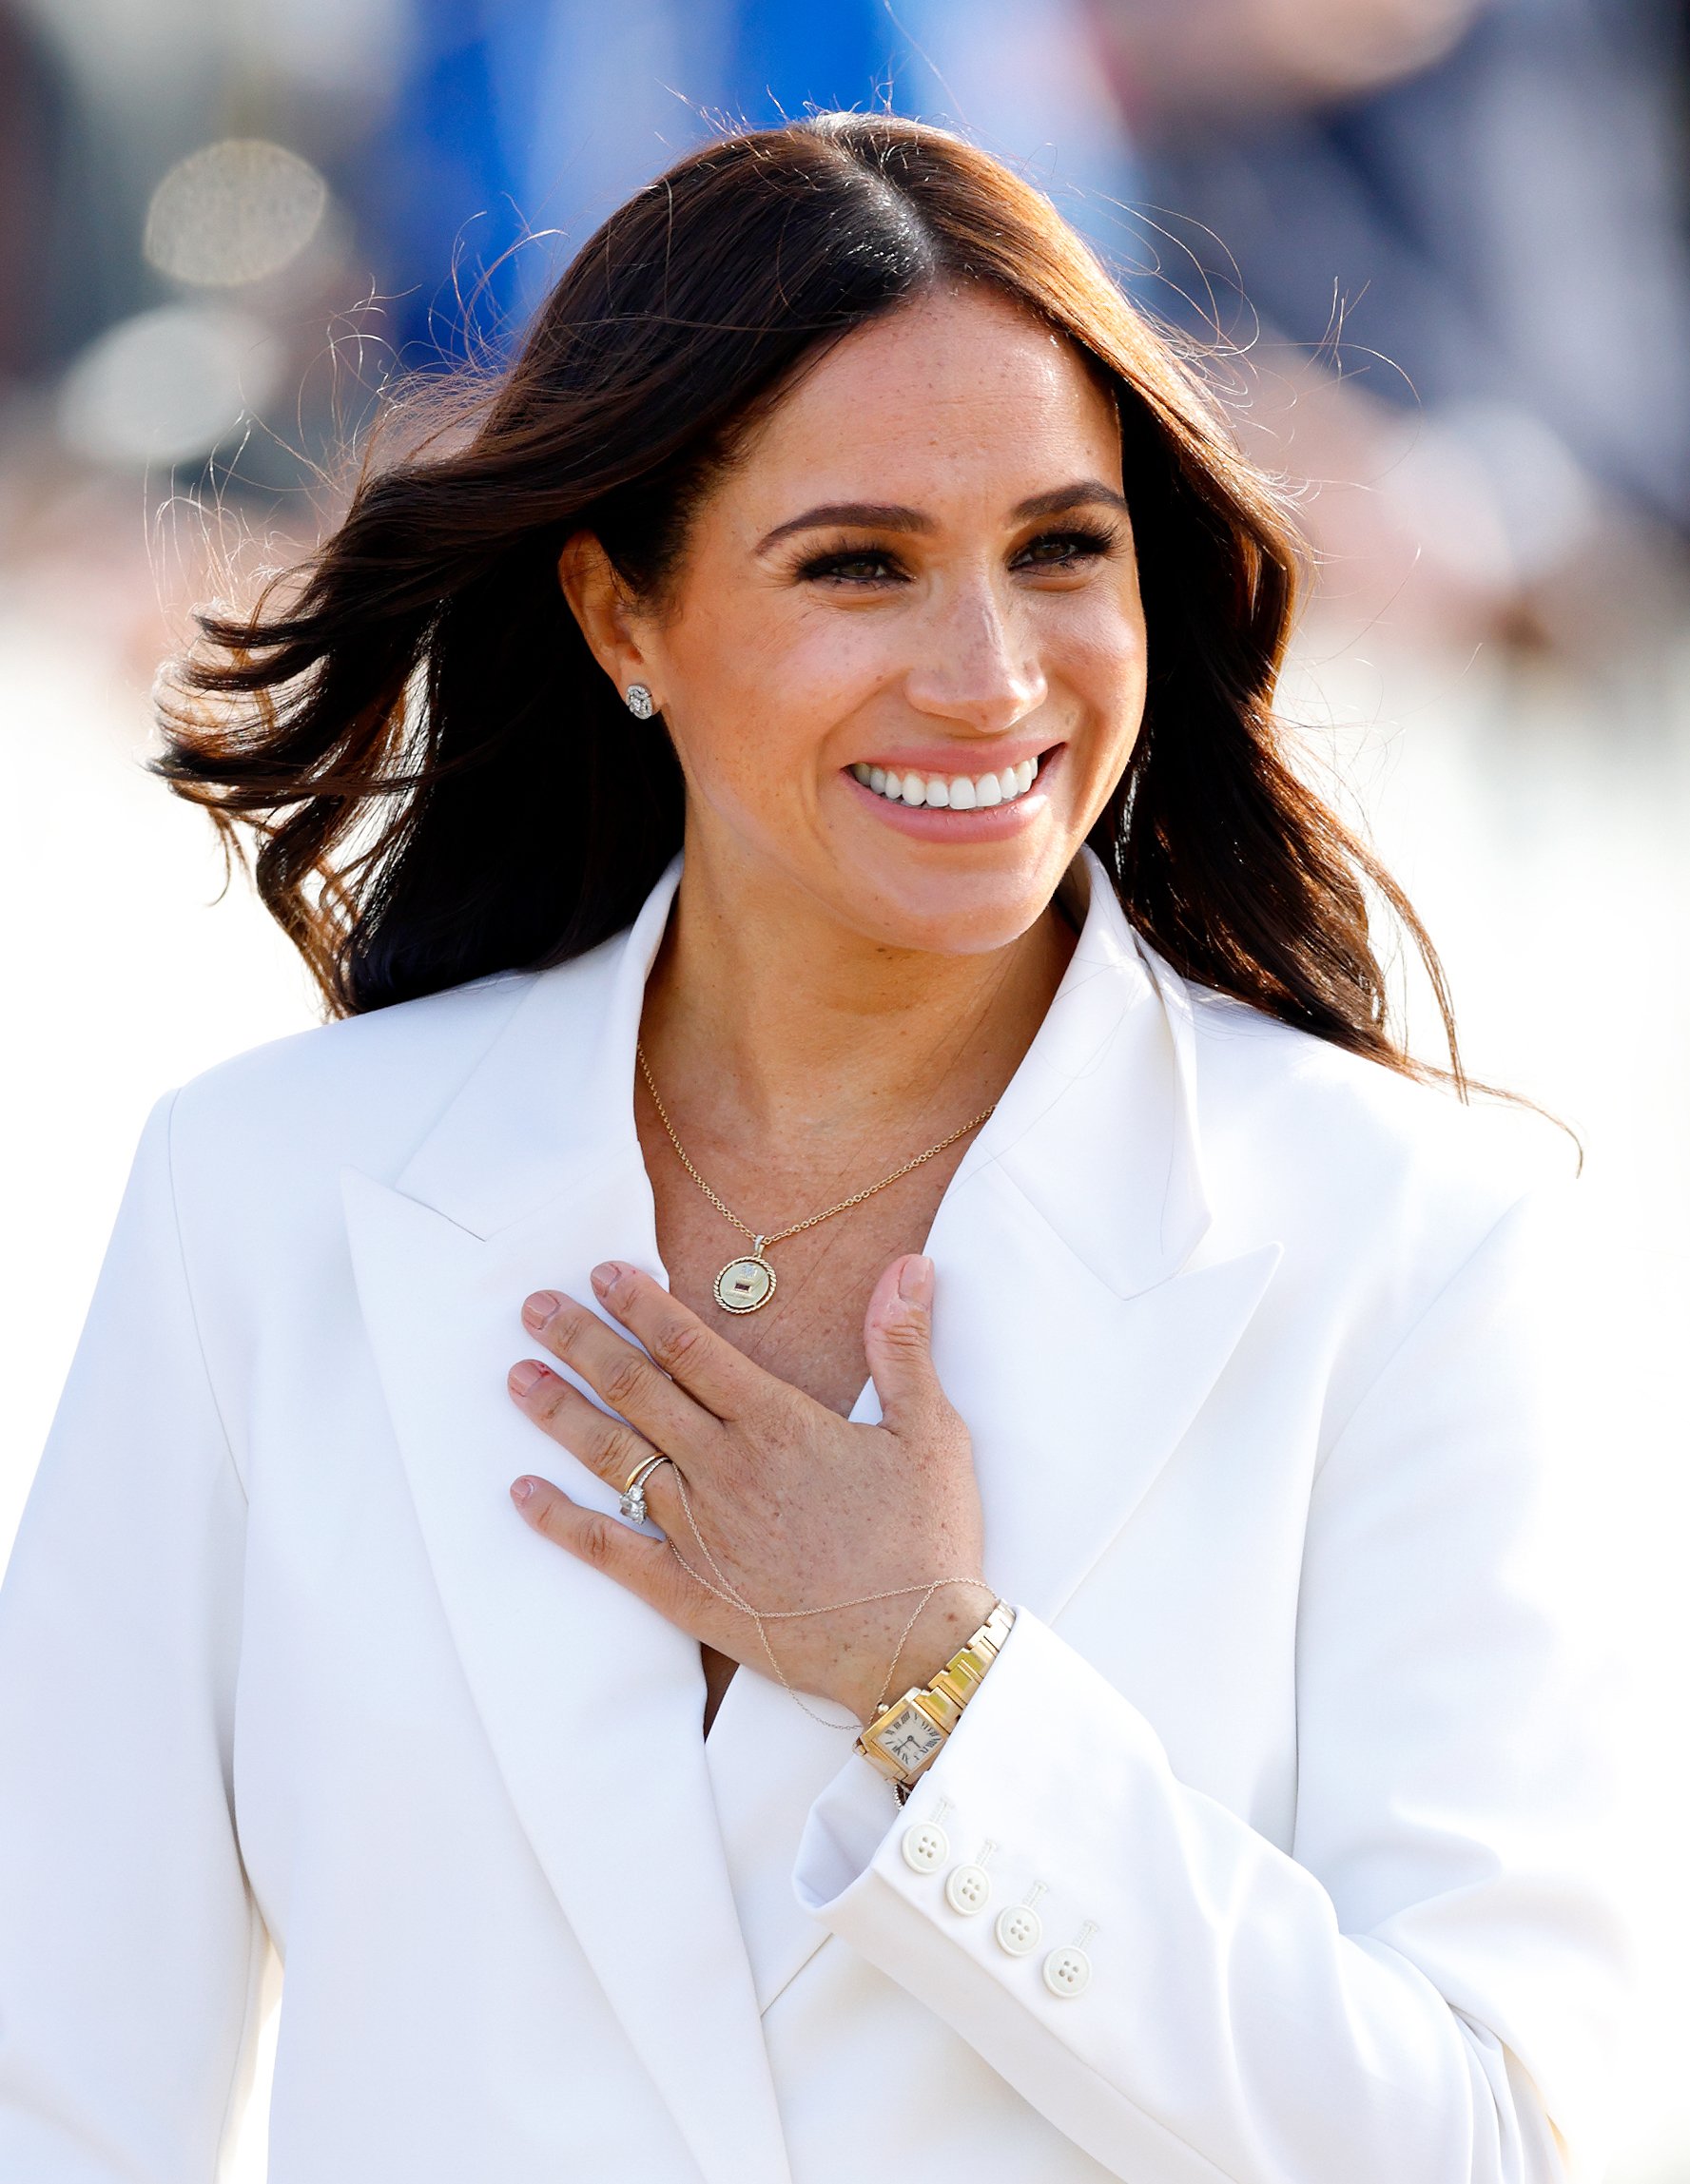 Meghan Markle, Duchess of Sussex attends an Invictus Games Friends and Family reception at Zuiderpark on April 15, 2022 in The Hague, Netherlands. | Source: Getty Images